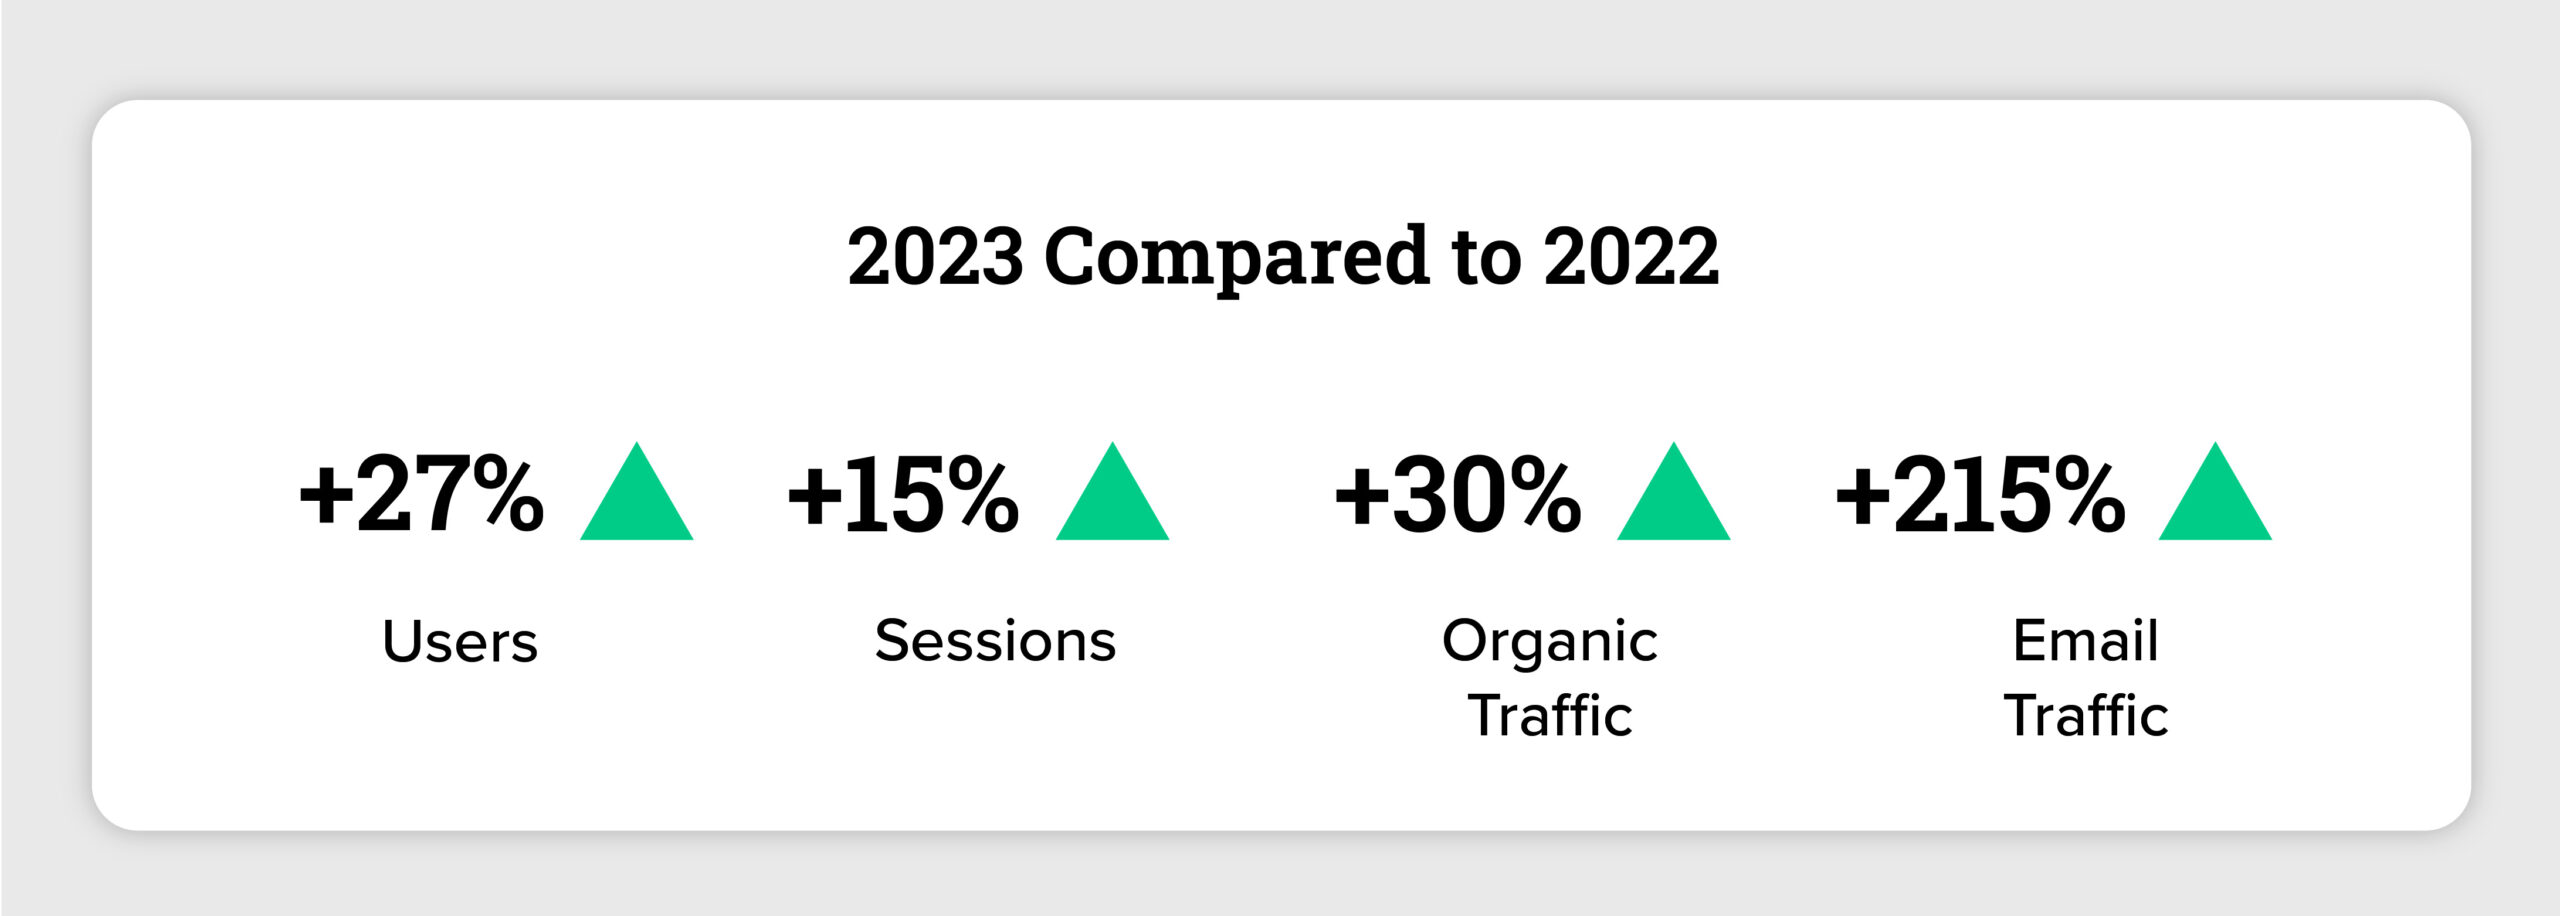 Scorecard chart showing 2023 stats versus 2022: +27% users, +15% session, +30% organic traffic, +215% email traffic.